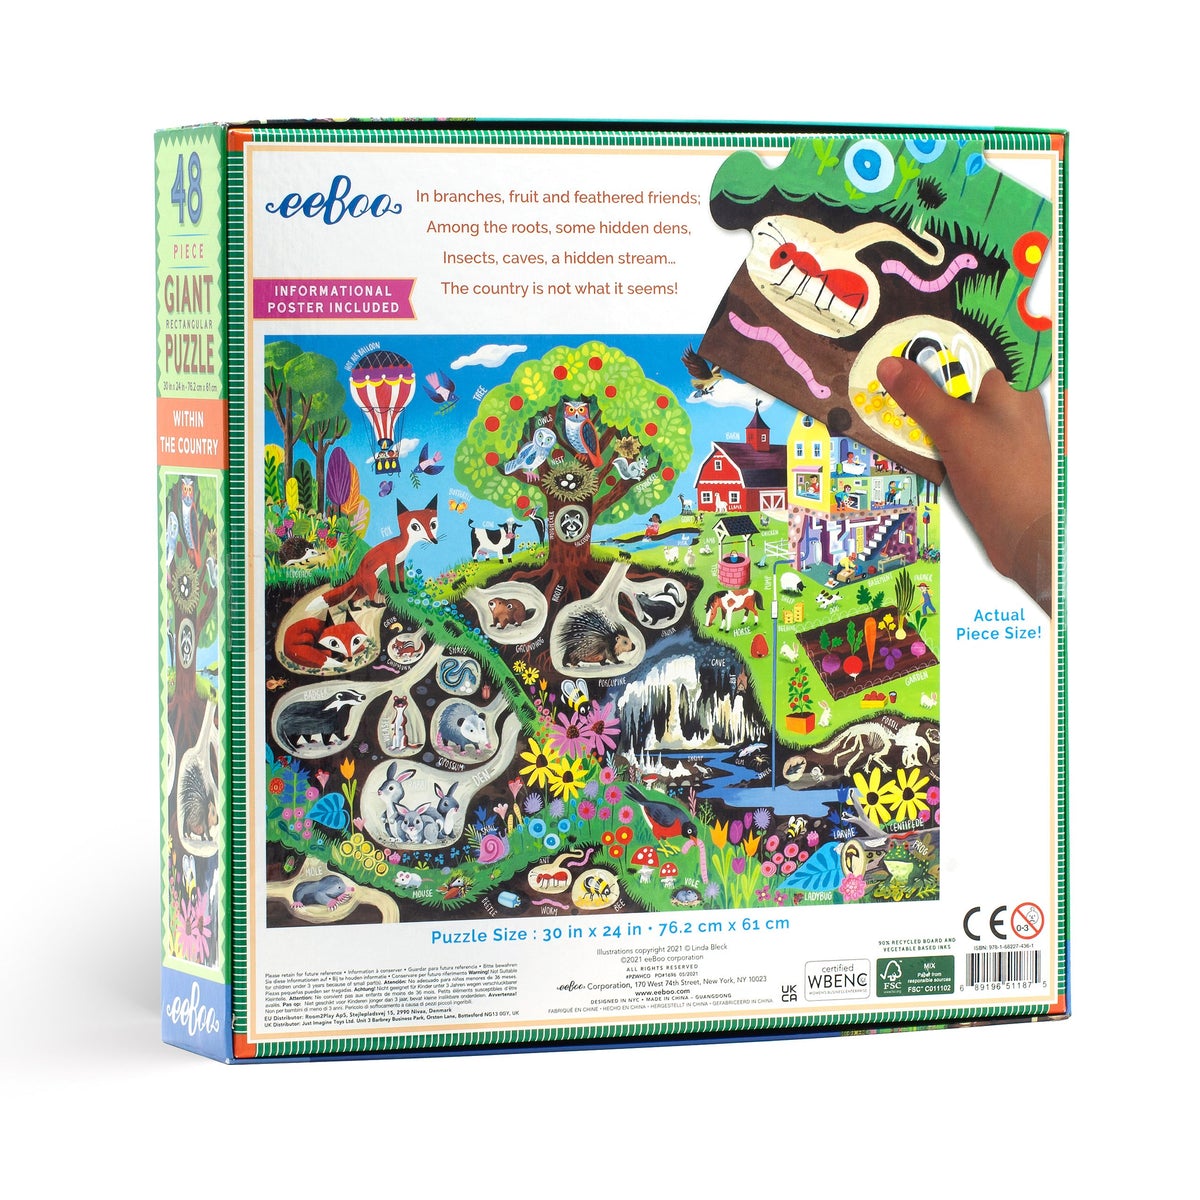 eeBoo 48 Piece Giant Puzzle Within The Country